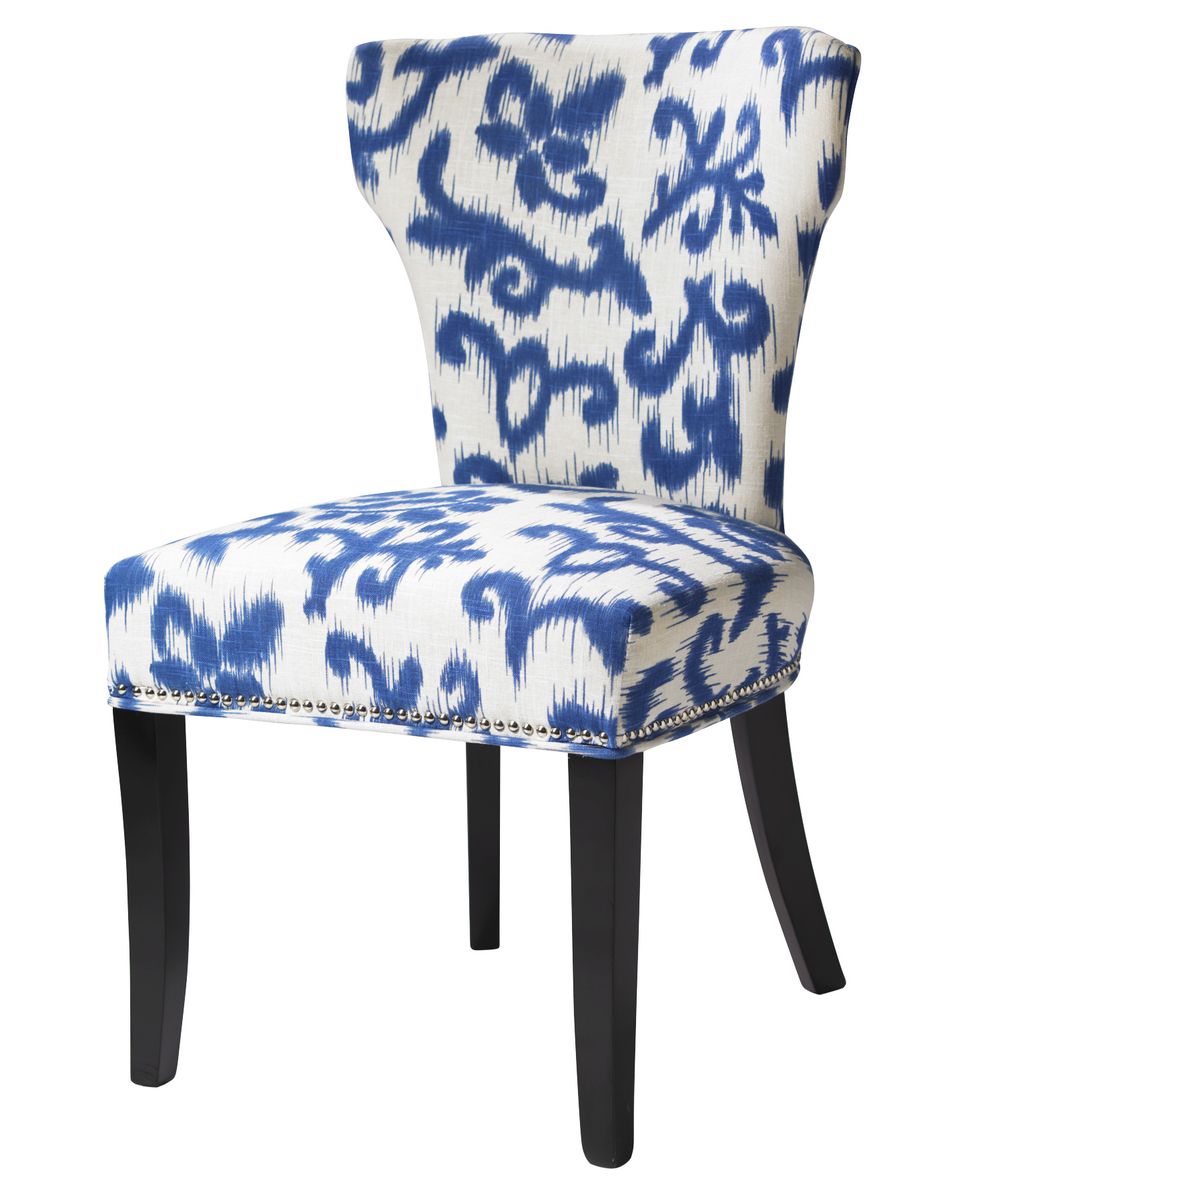 An upholstered chair in a blue and white print from HomeGoods (www.homegoods.com).